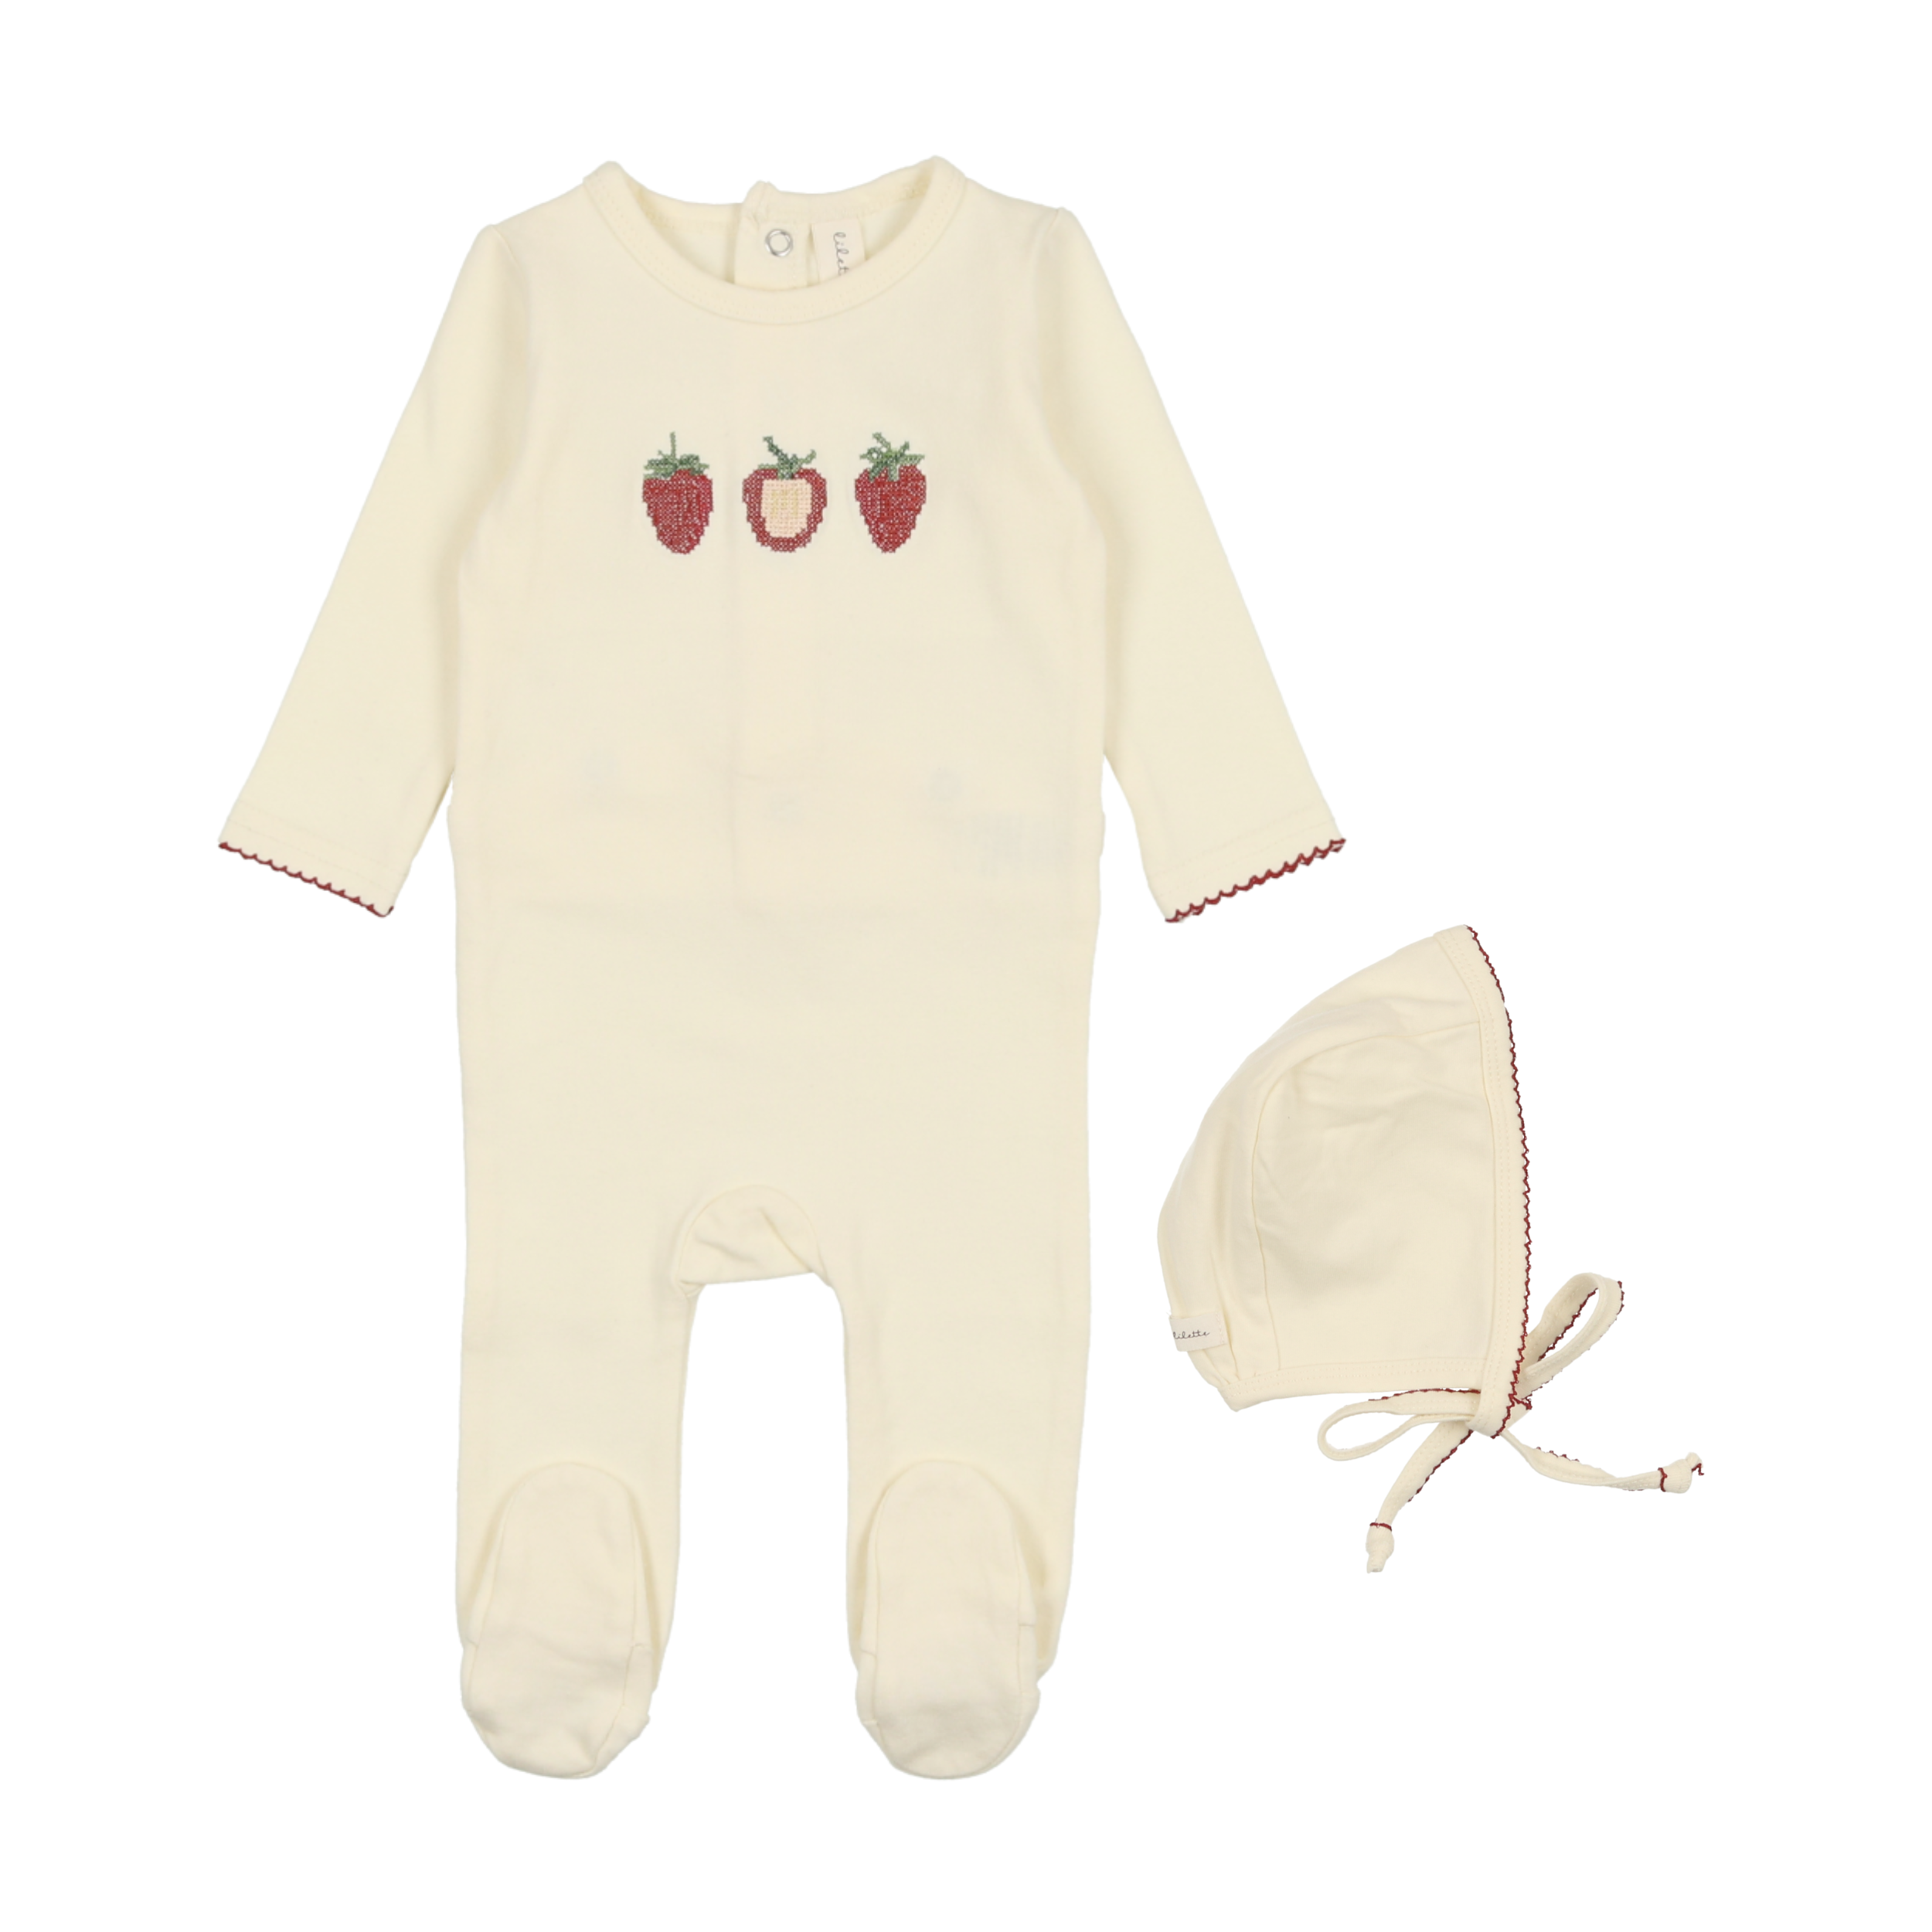 Ivory/Strawberry Embroidered Fruit Footie & Bonnet